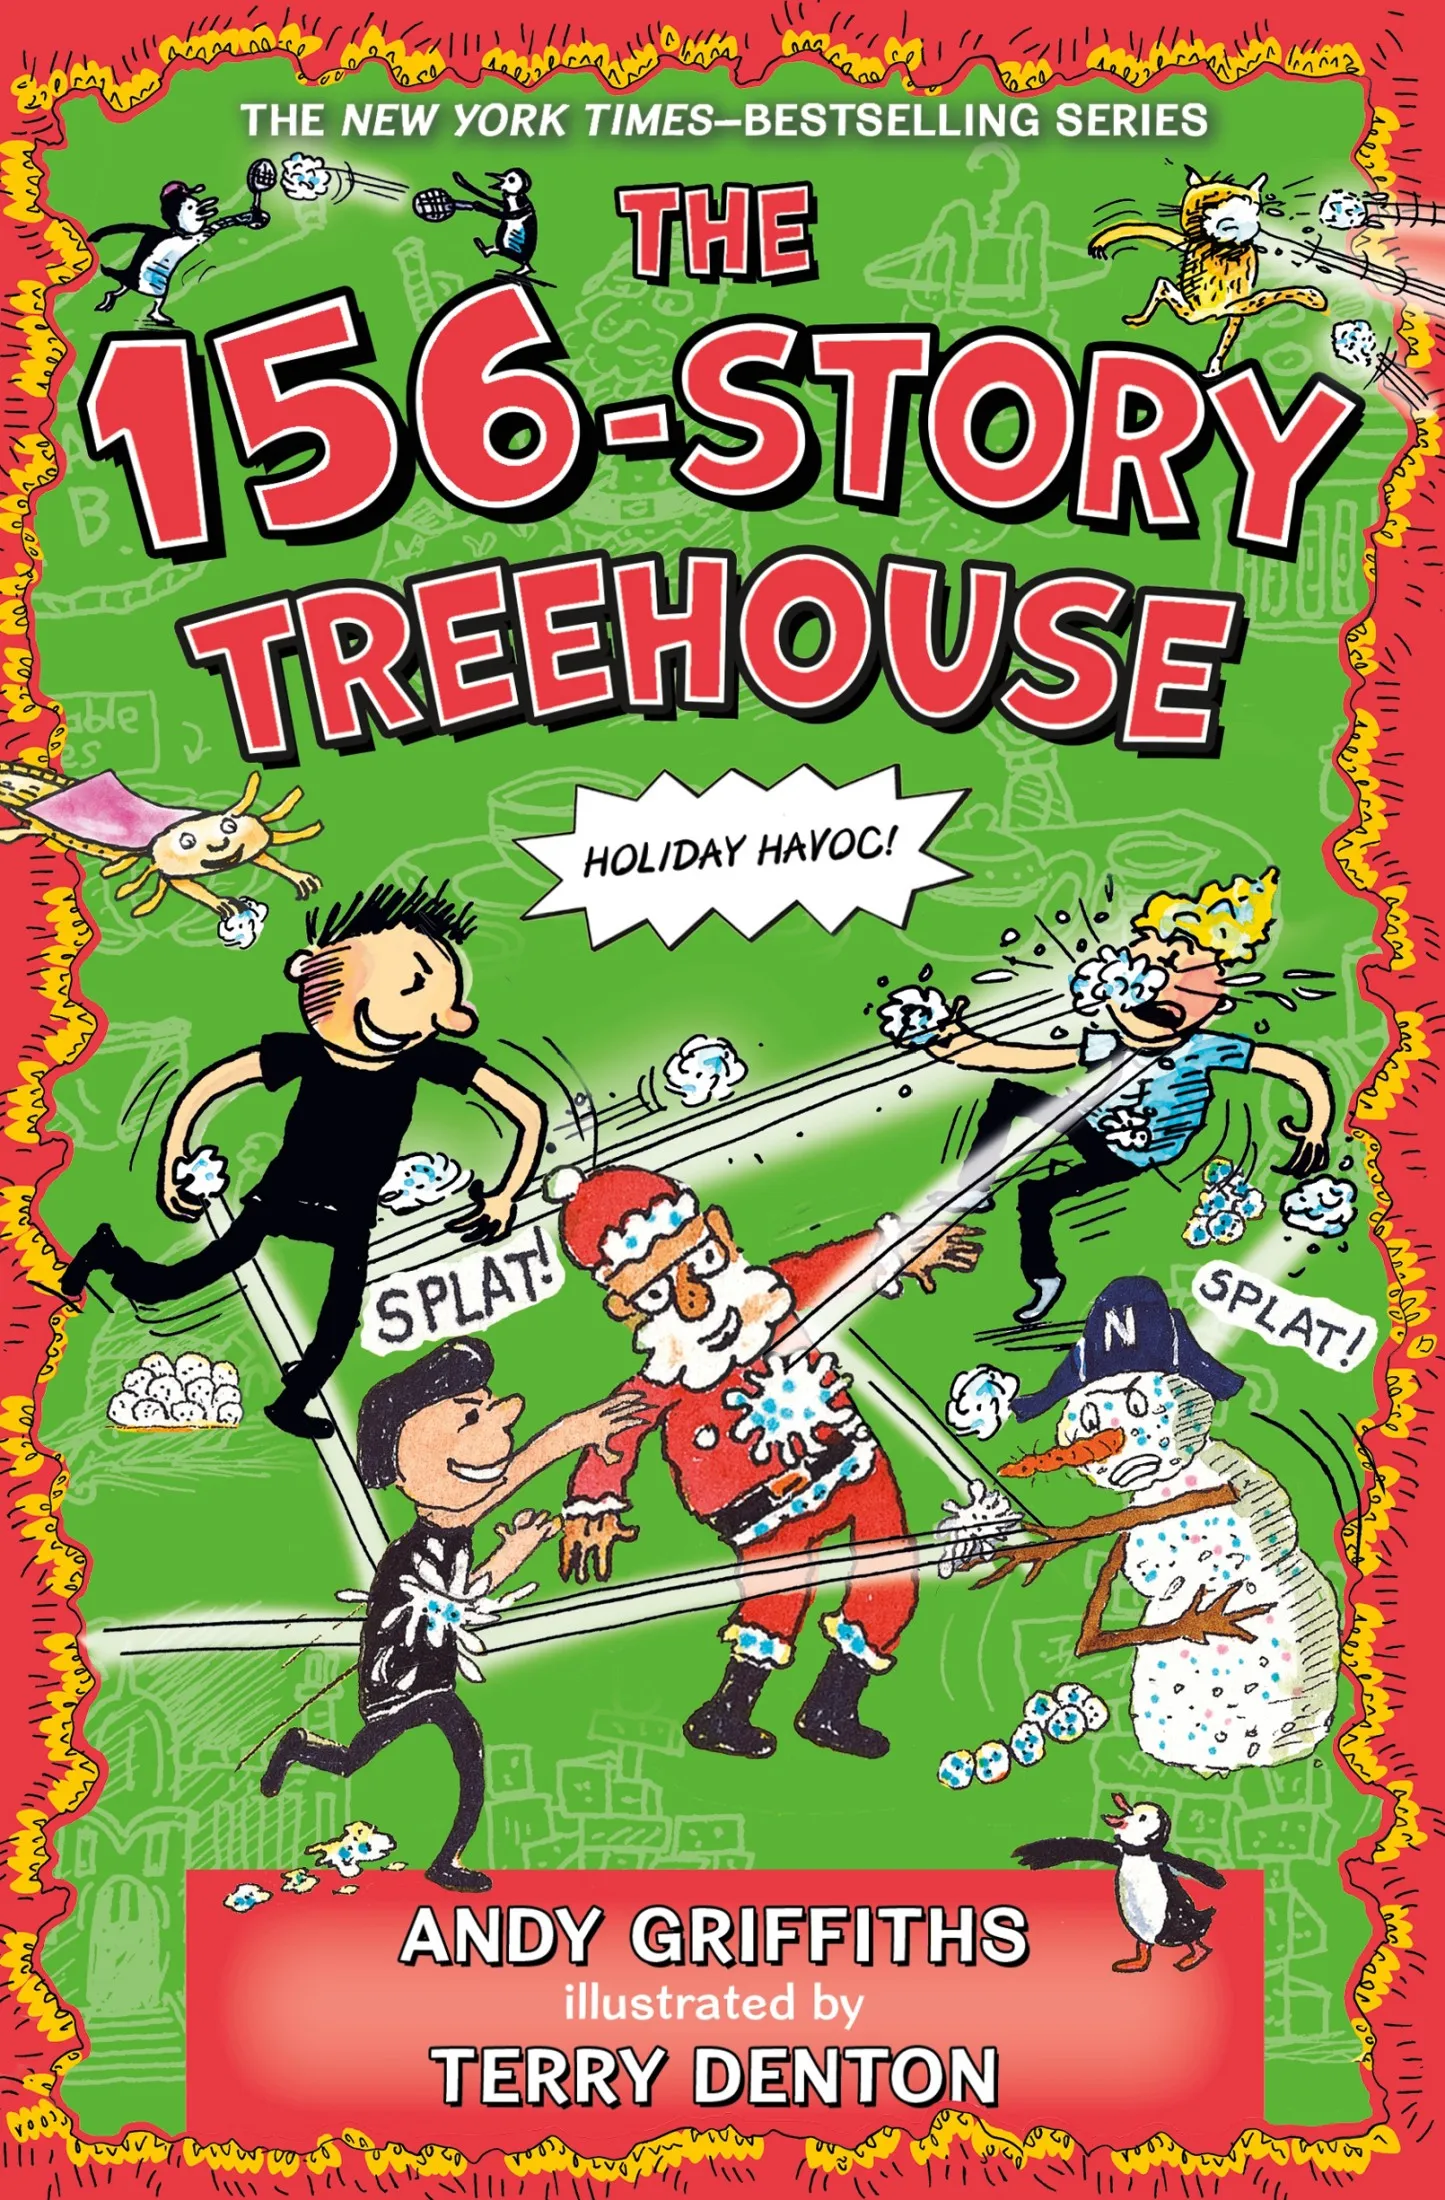 The 156-Story Treehouse (The Treehouse Books #12)